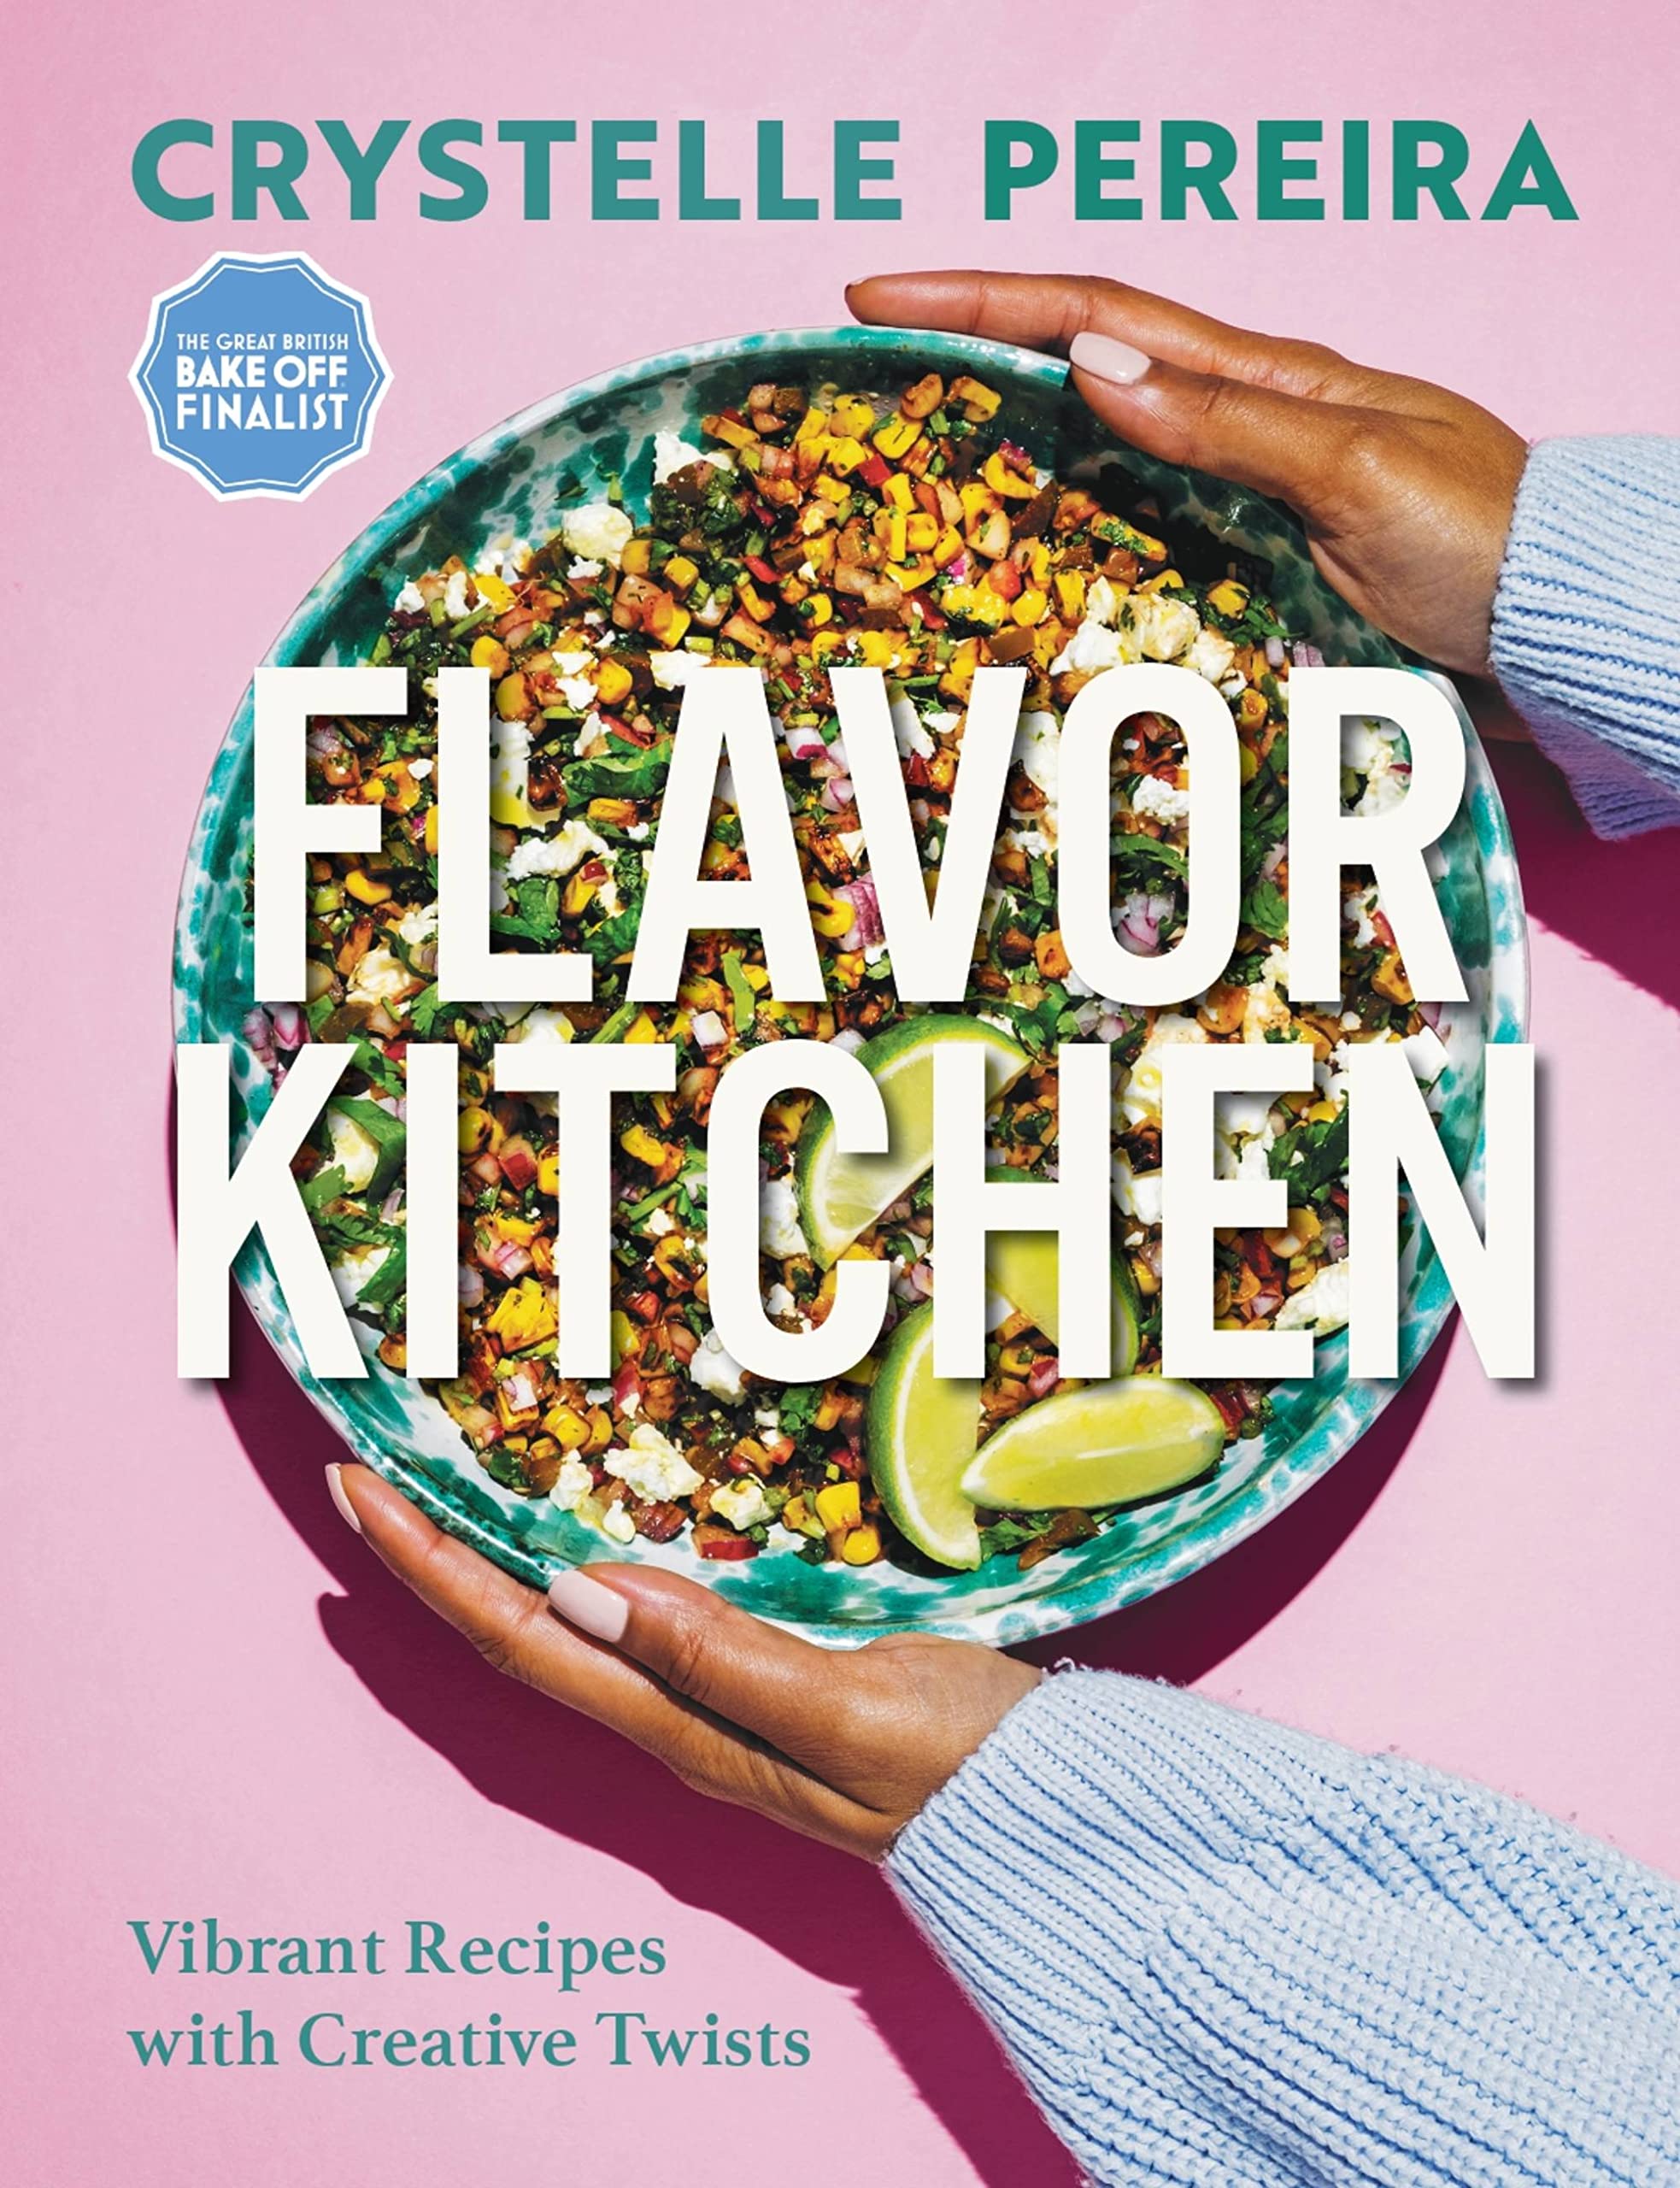 Flavor Kitchen: Vibrant Recipes with Creative Twists (Crystelle Pereira) *Signed*